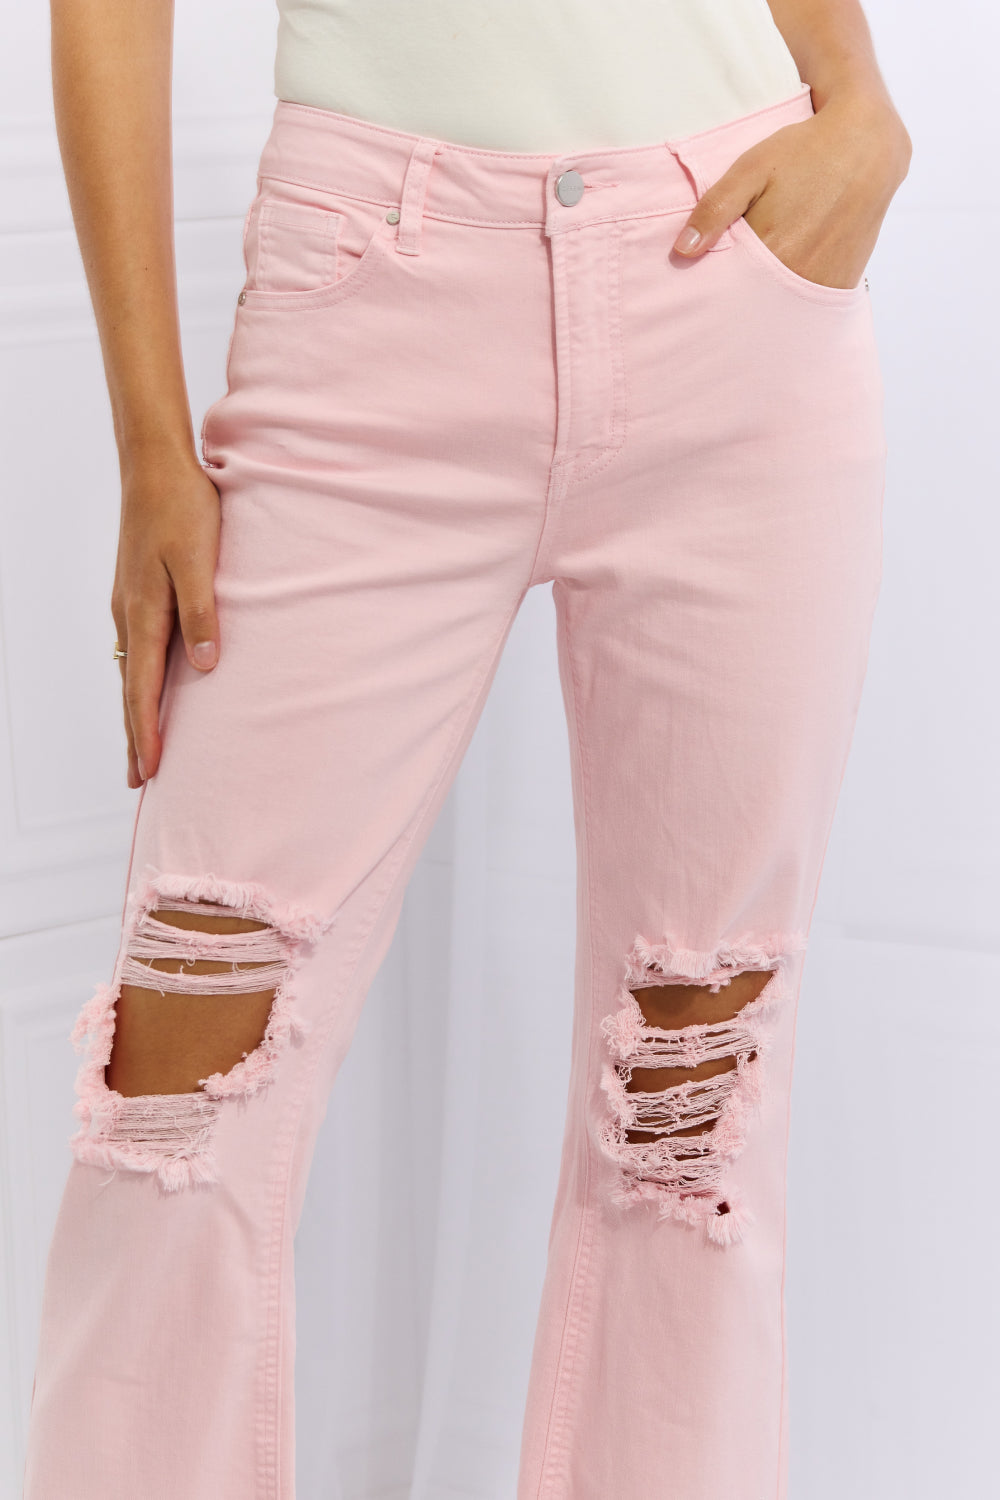 RISEN Miley Distressed Ankle Flare Jeans